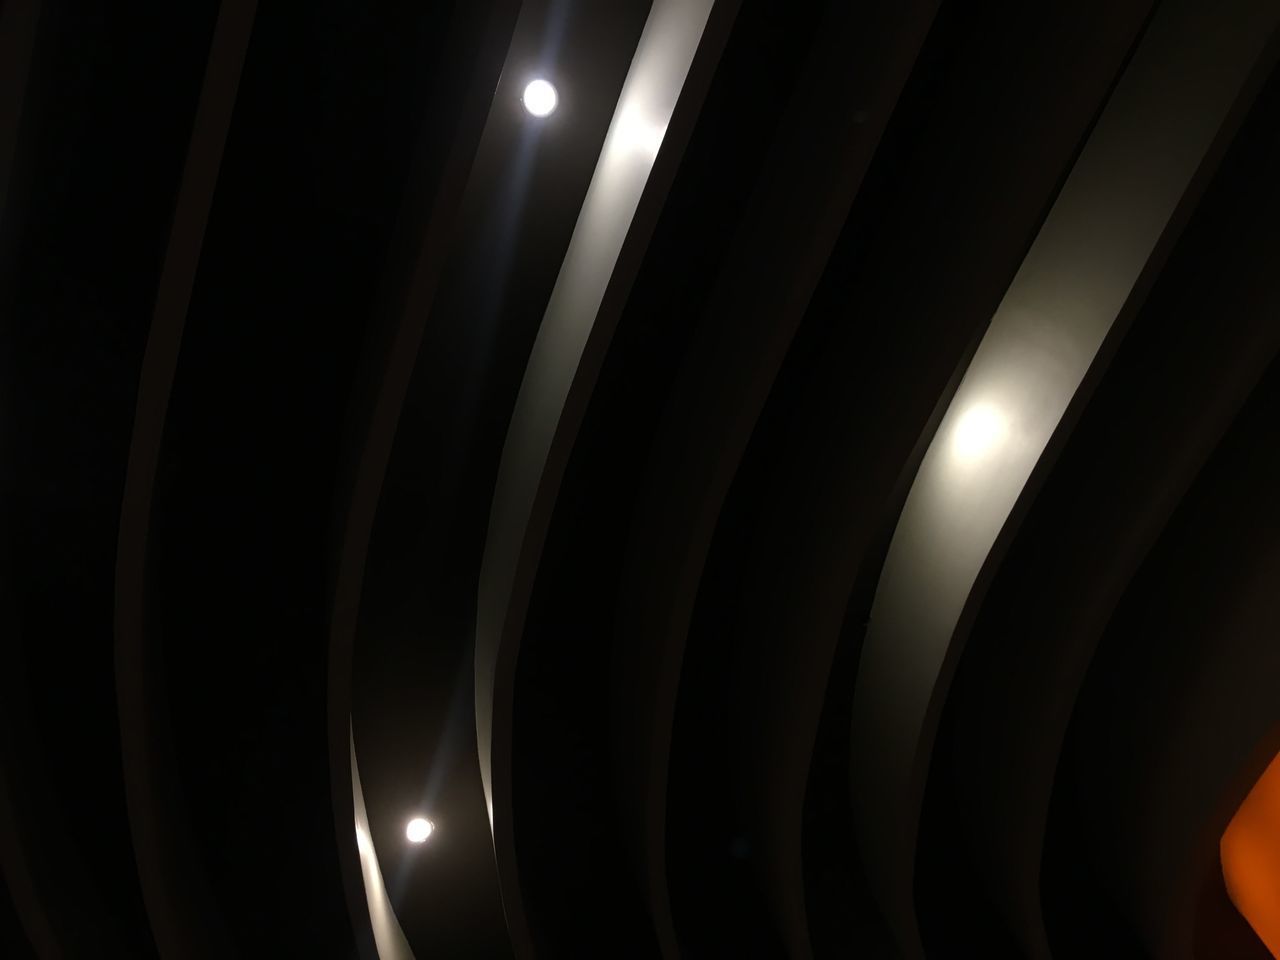 LOW ANGLE VIEW OF ILLUMINATED LIGHT BULB IN THE DARK